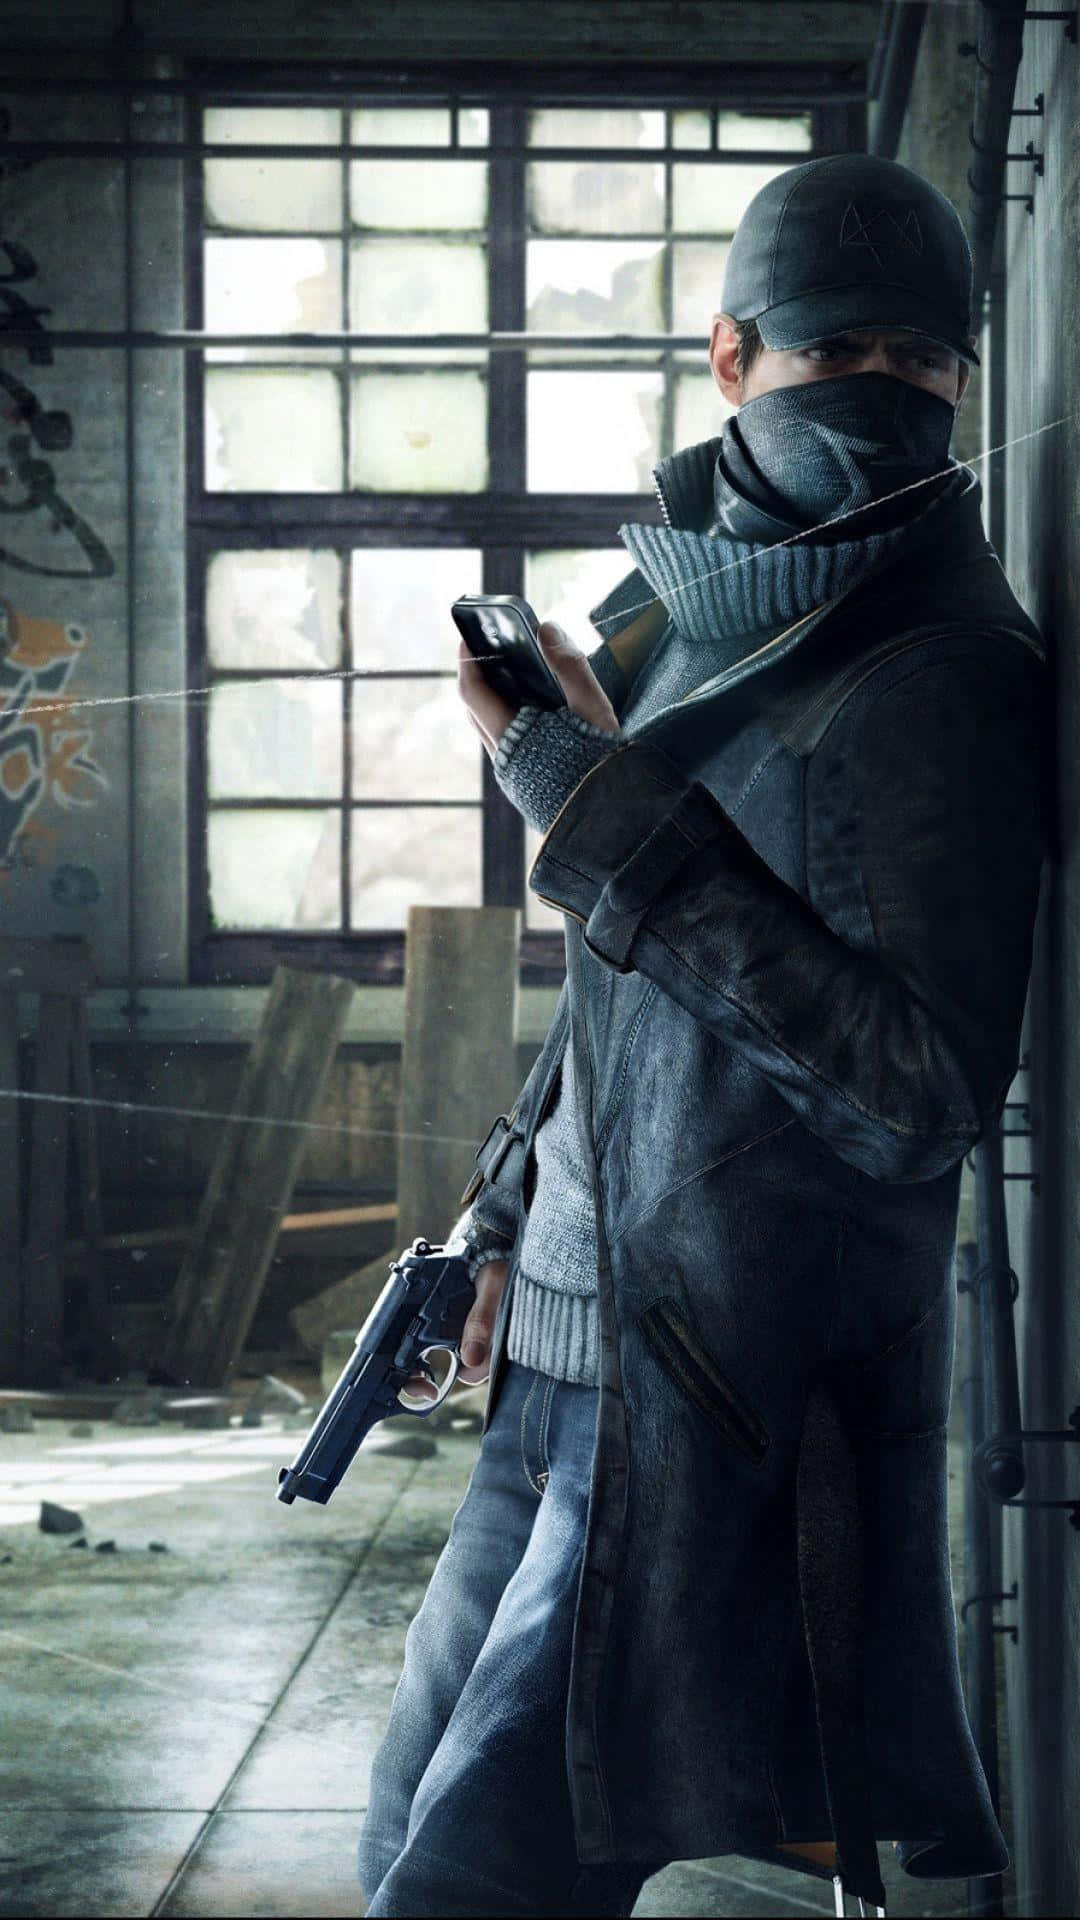 Watch Dogs Pc - Pc Game Wallpaper